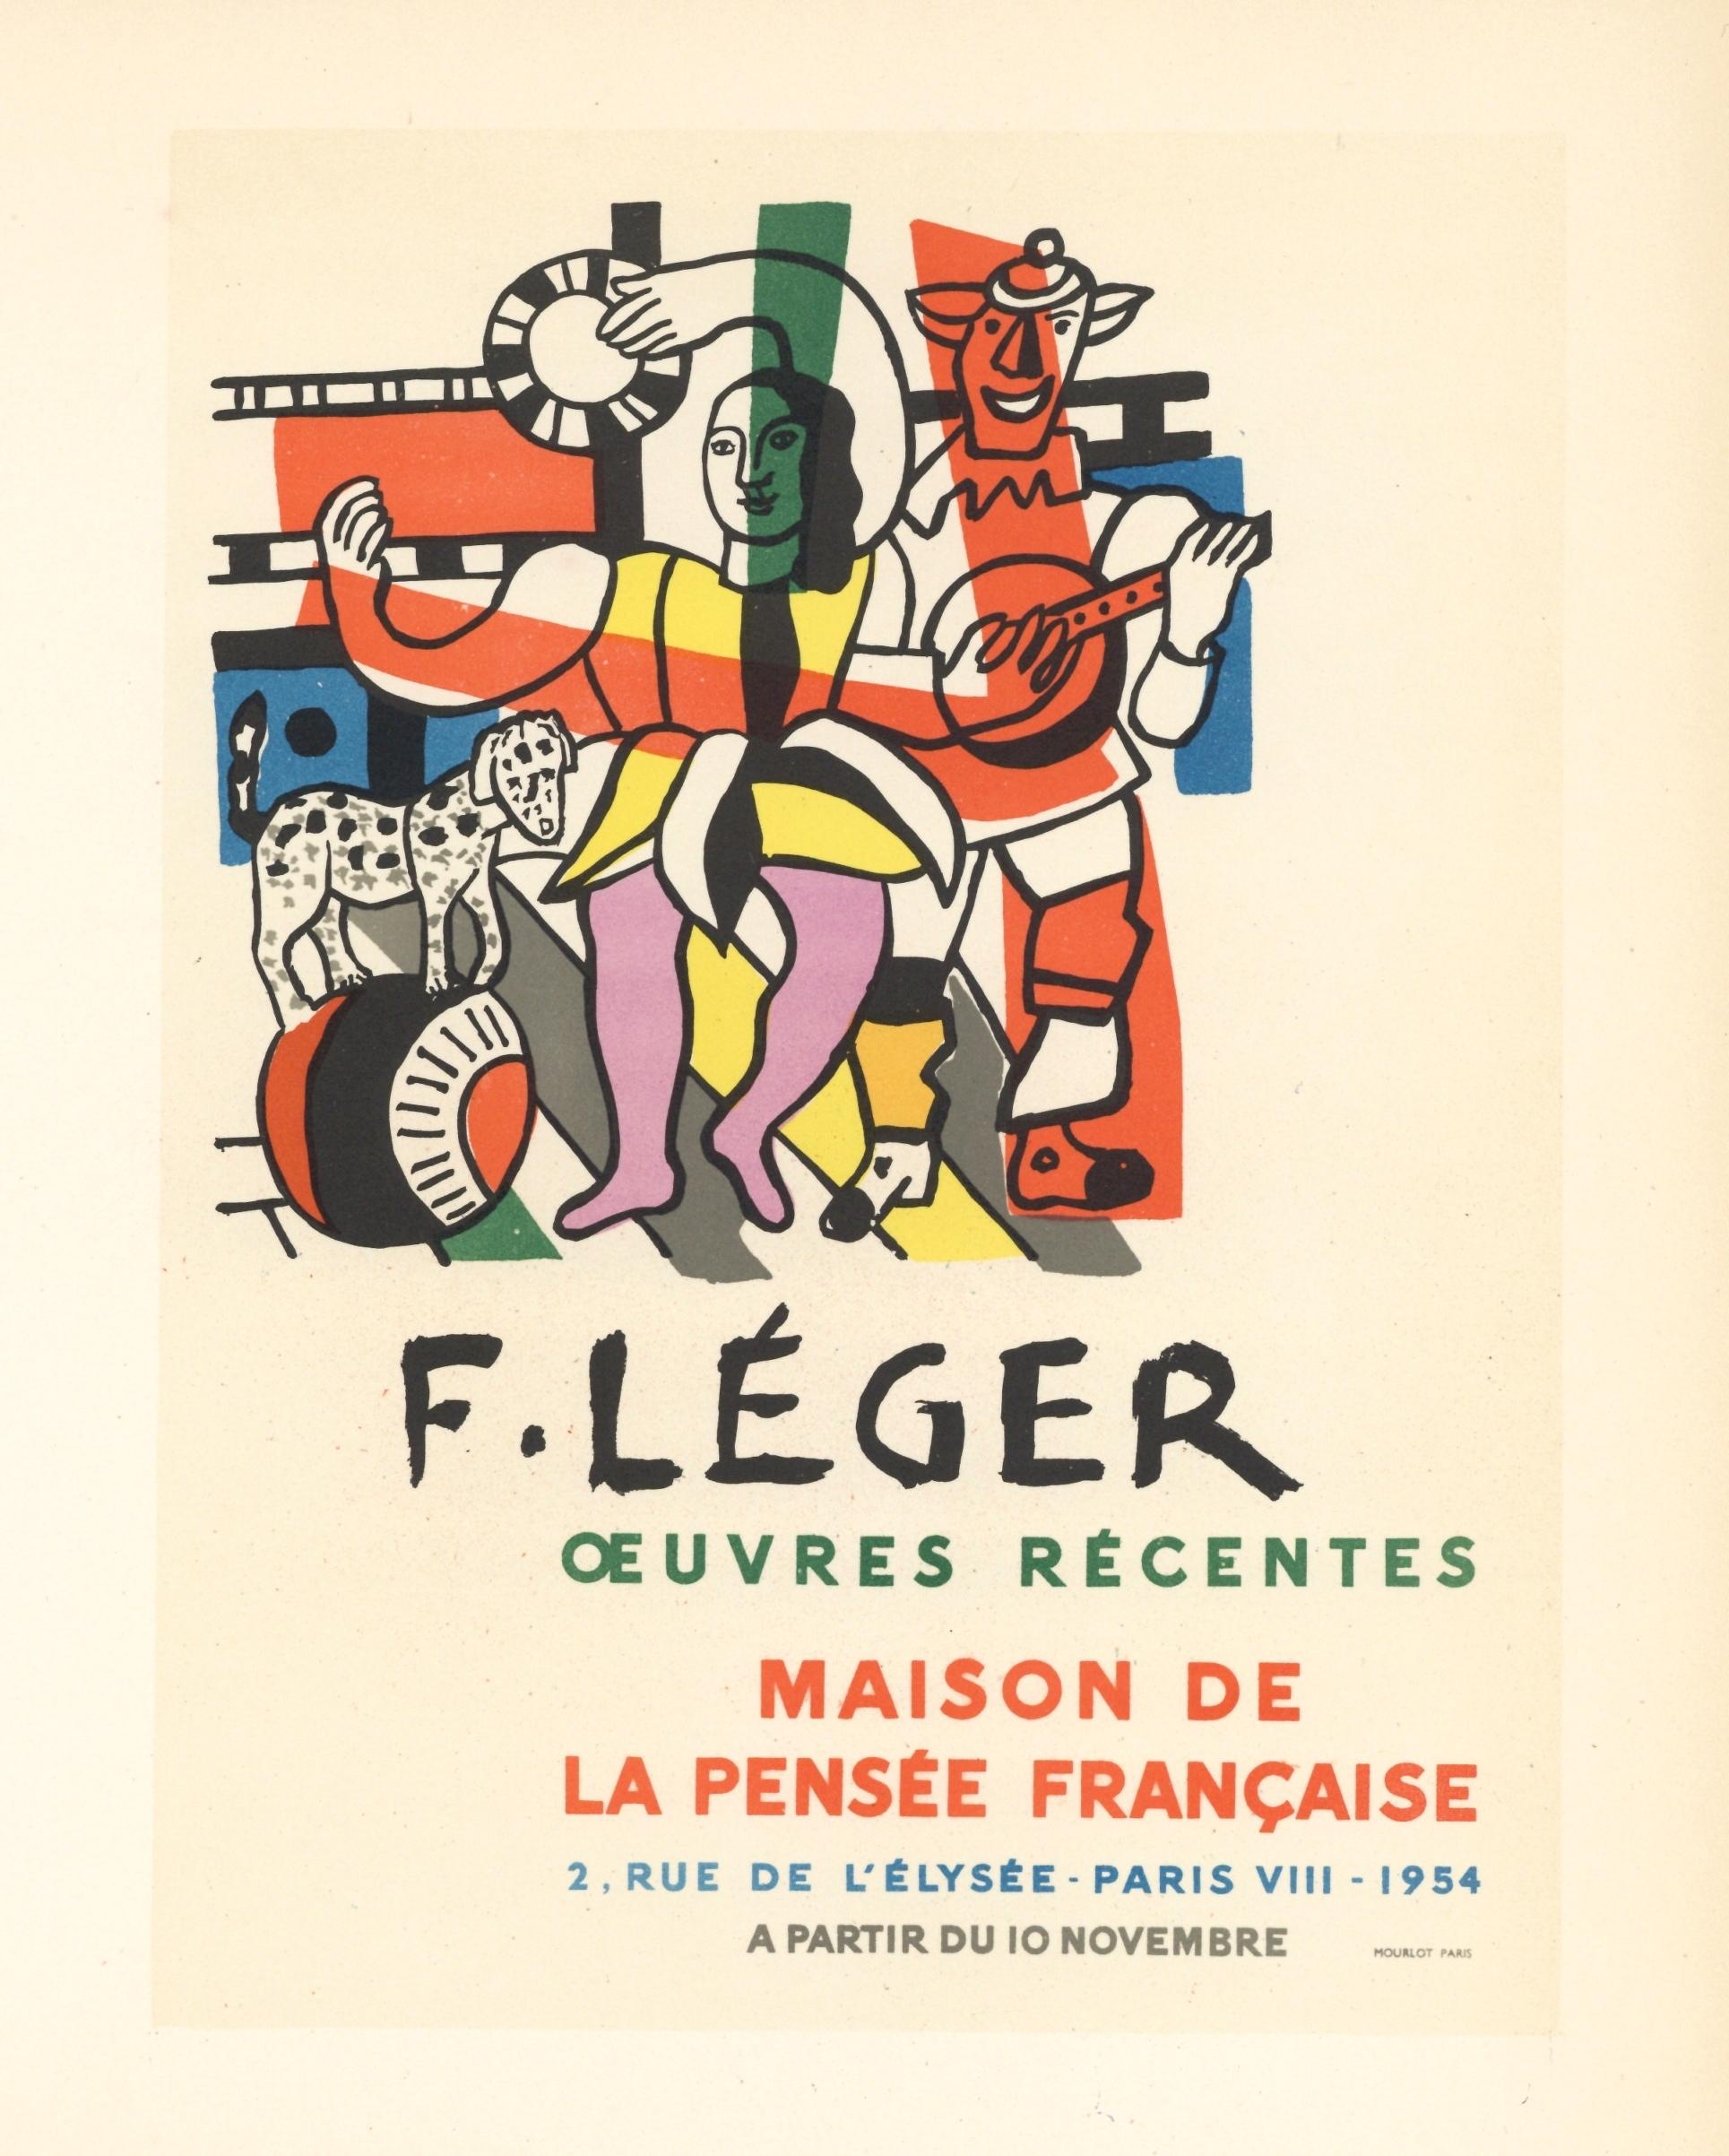 "Oeurves Recentes" lithograph poster - Print by (after) Fernand Léger